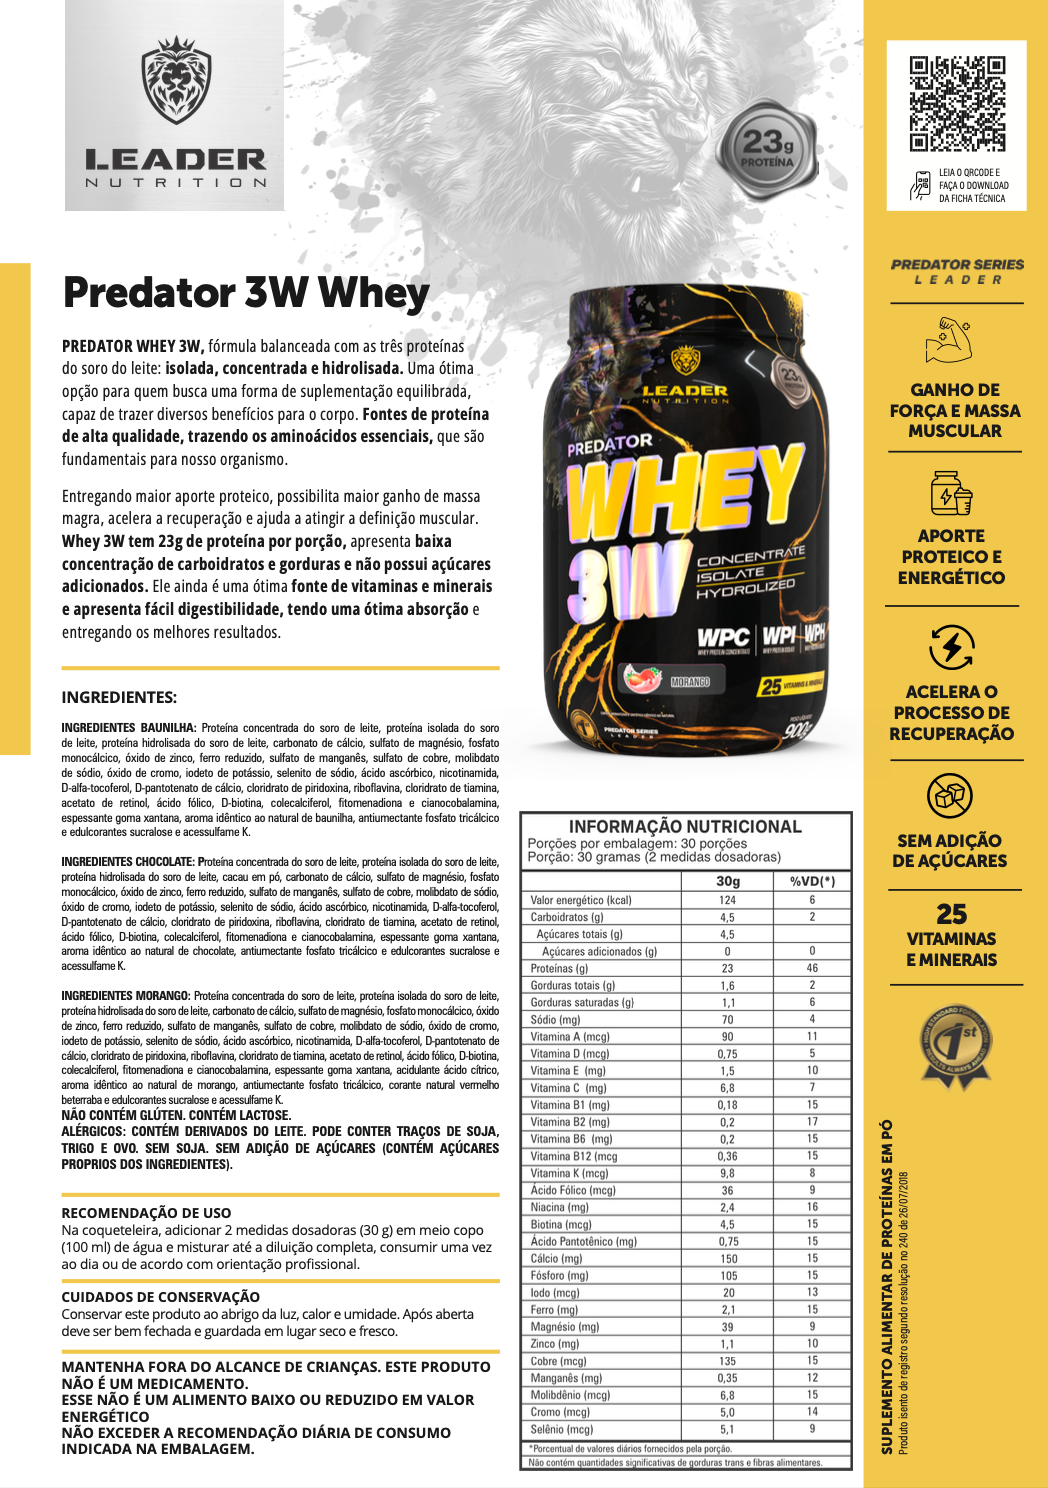 Whey Protein 3W Leader Nutrition